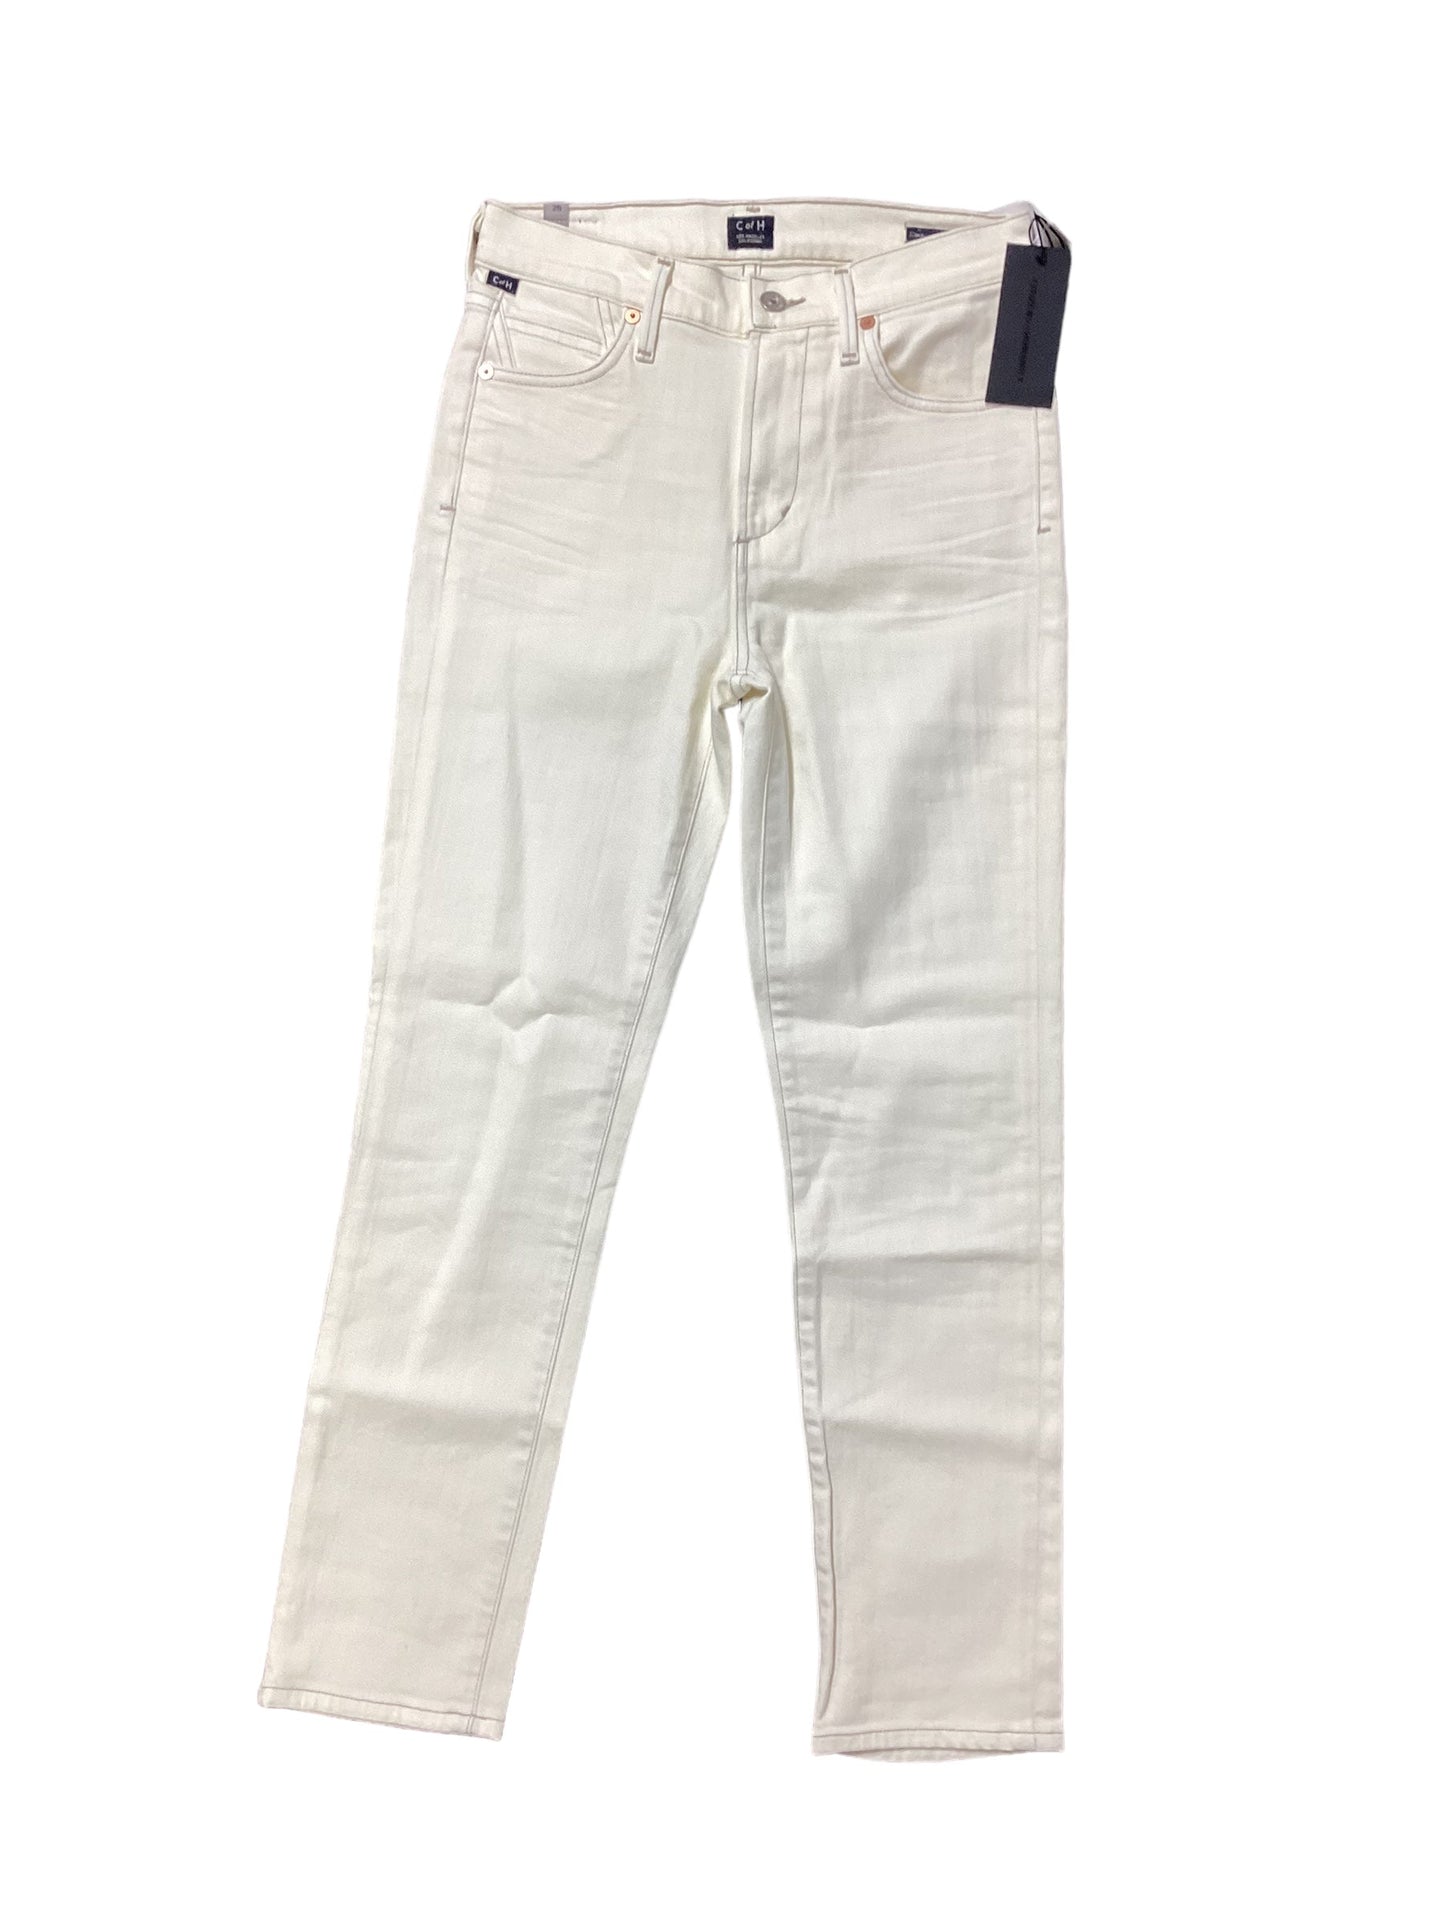 Cream Jeans Straight Citizens Of Humanity, Size 2